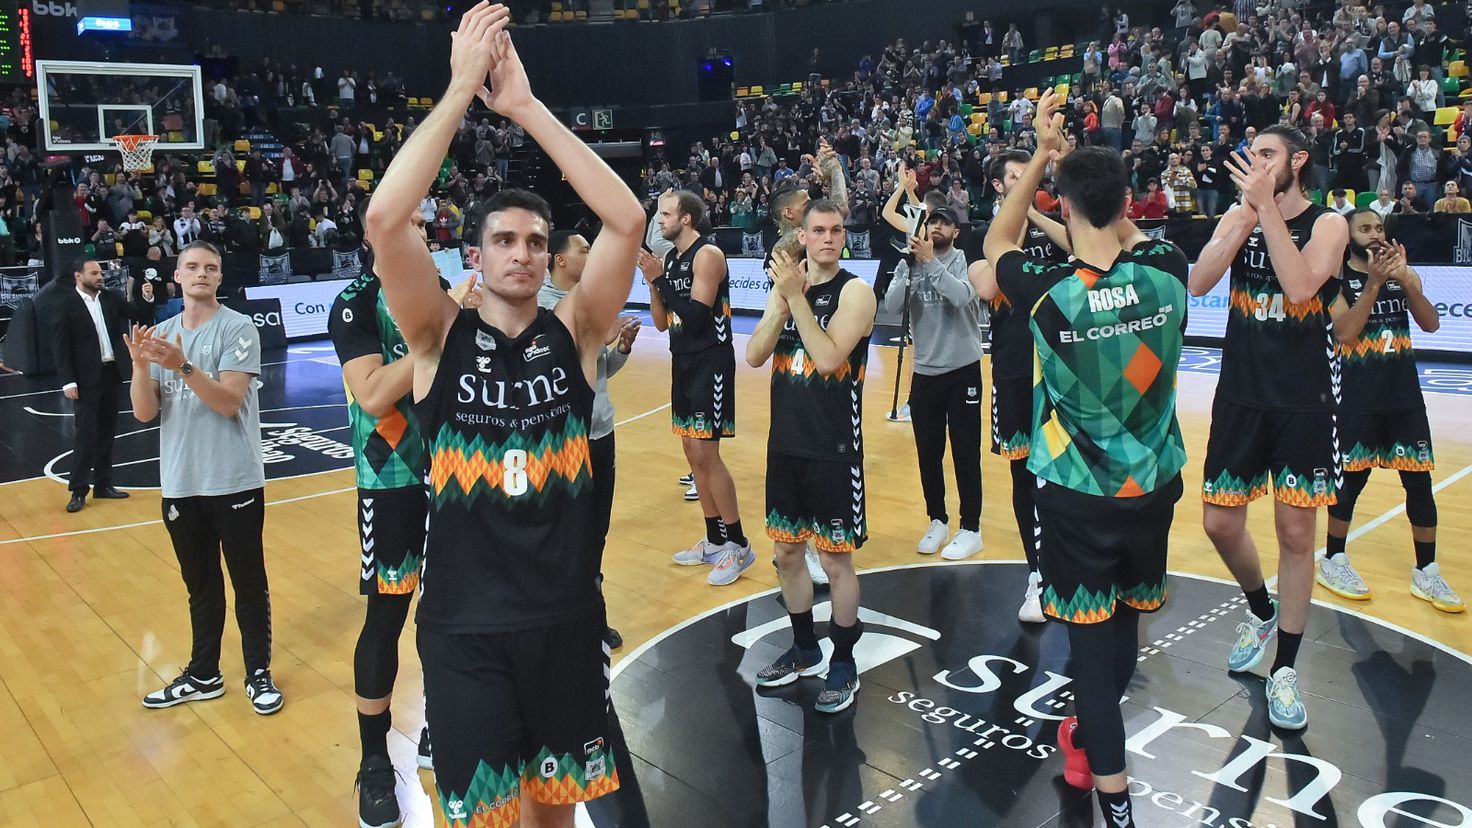 Unicaja meets in Bilbao, but finishes fifth
